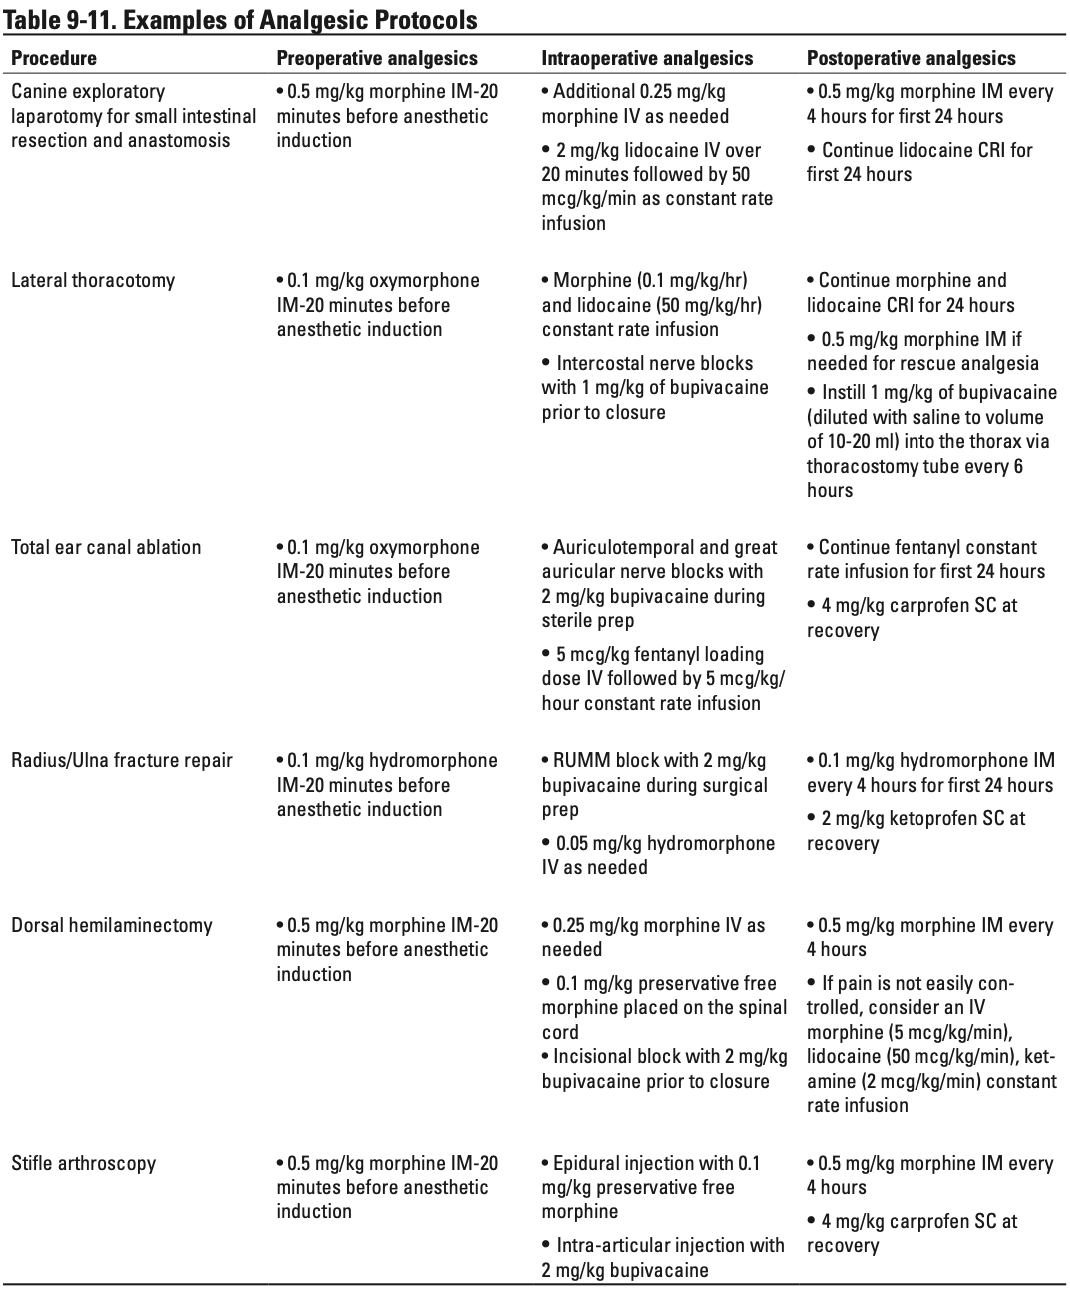 Table 9-11. Examples of Analgesic Protocols